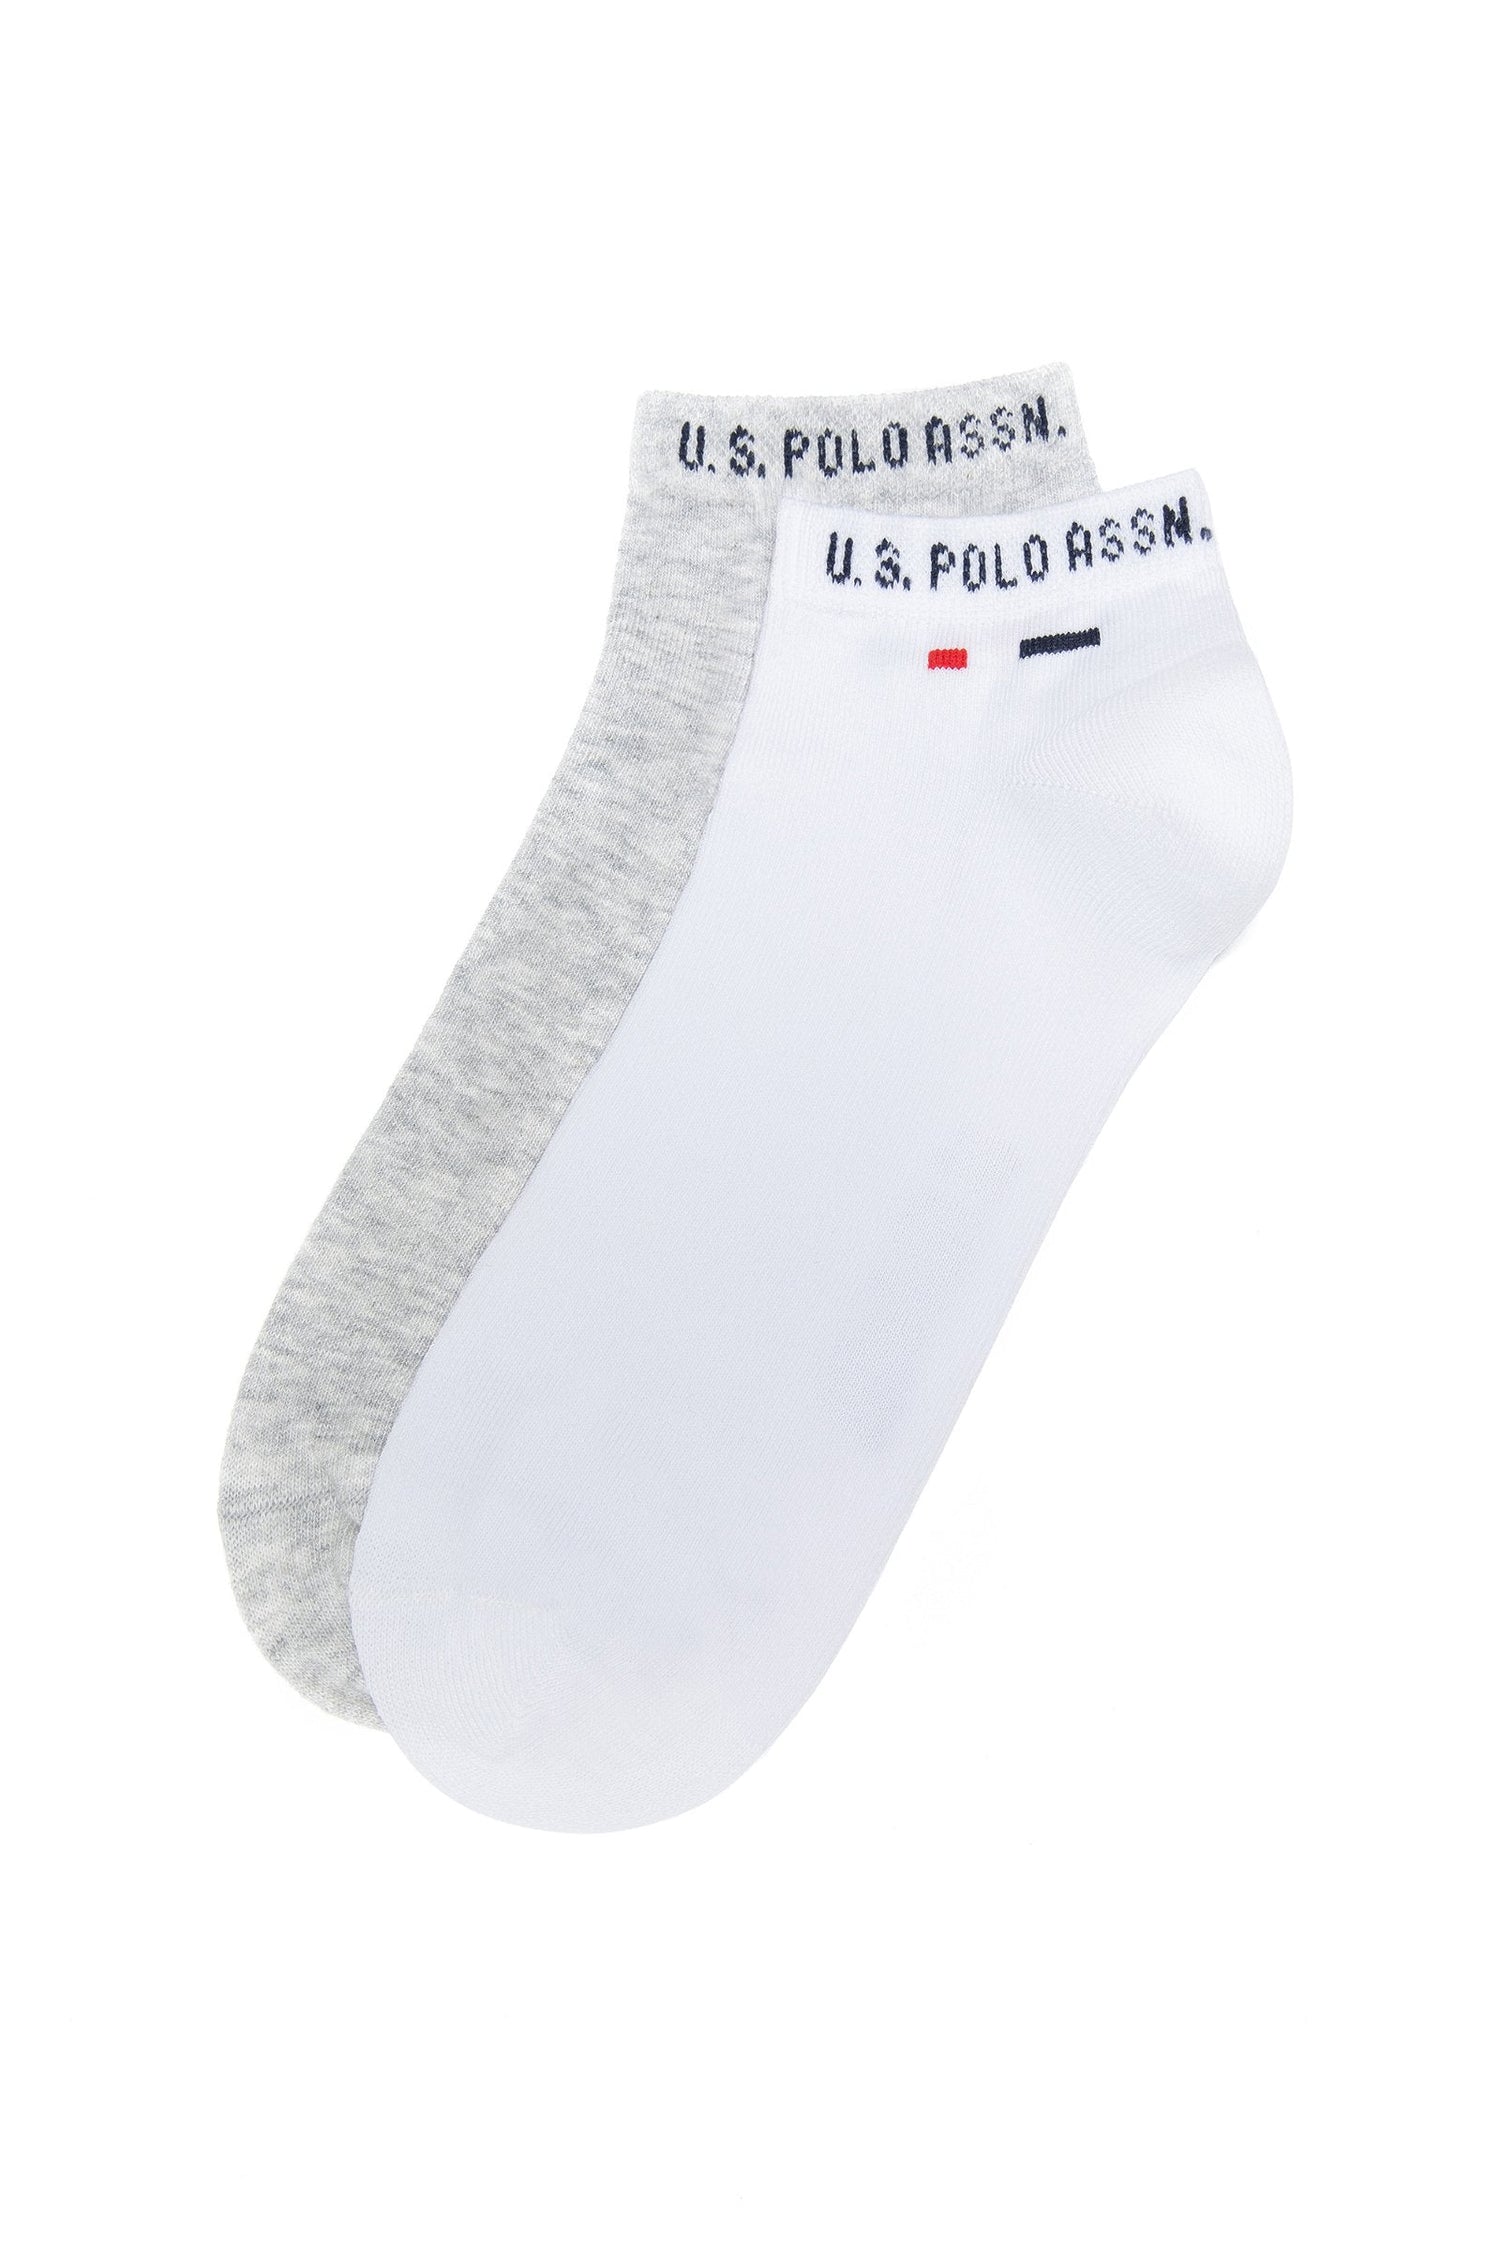 2-Pack Grey And White Low Socks